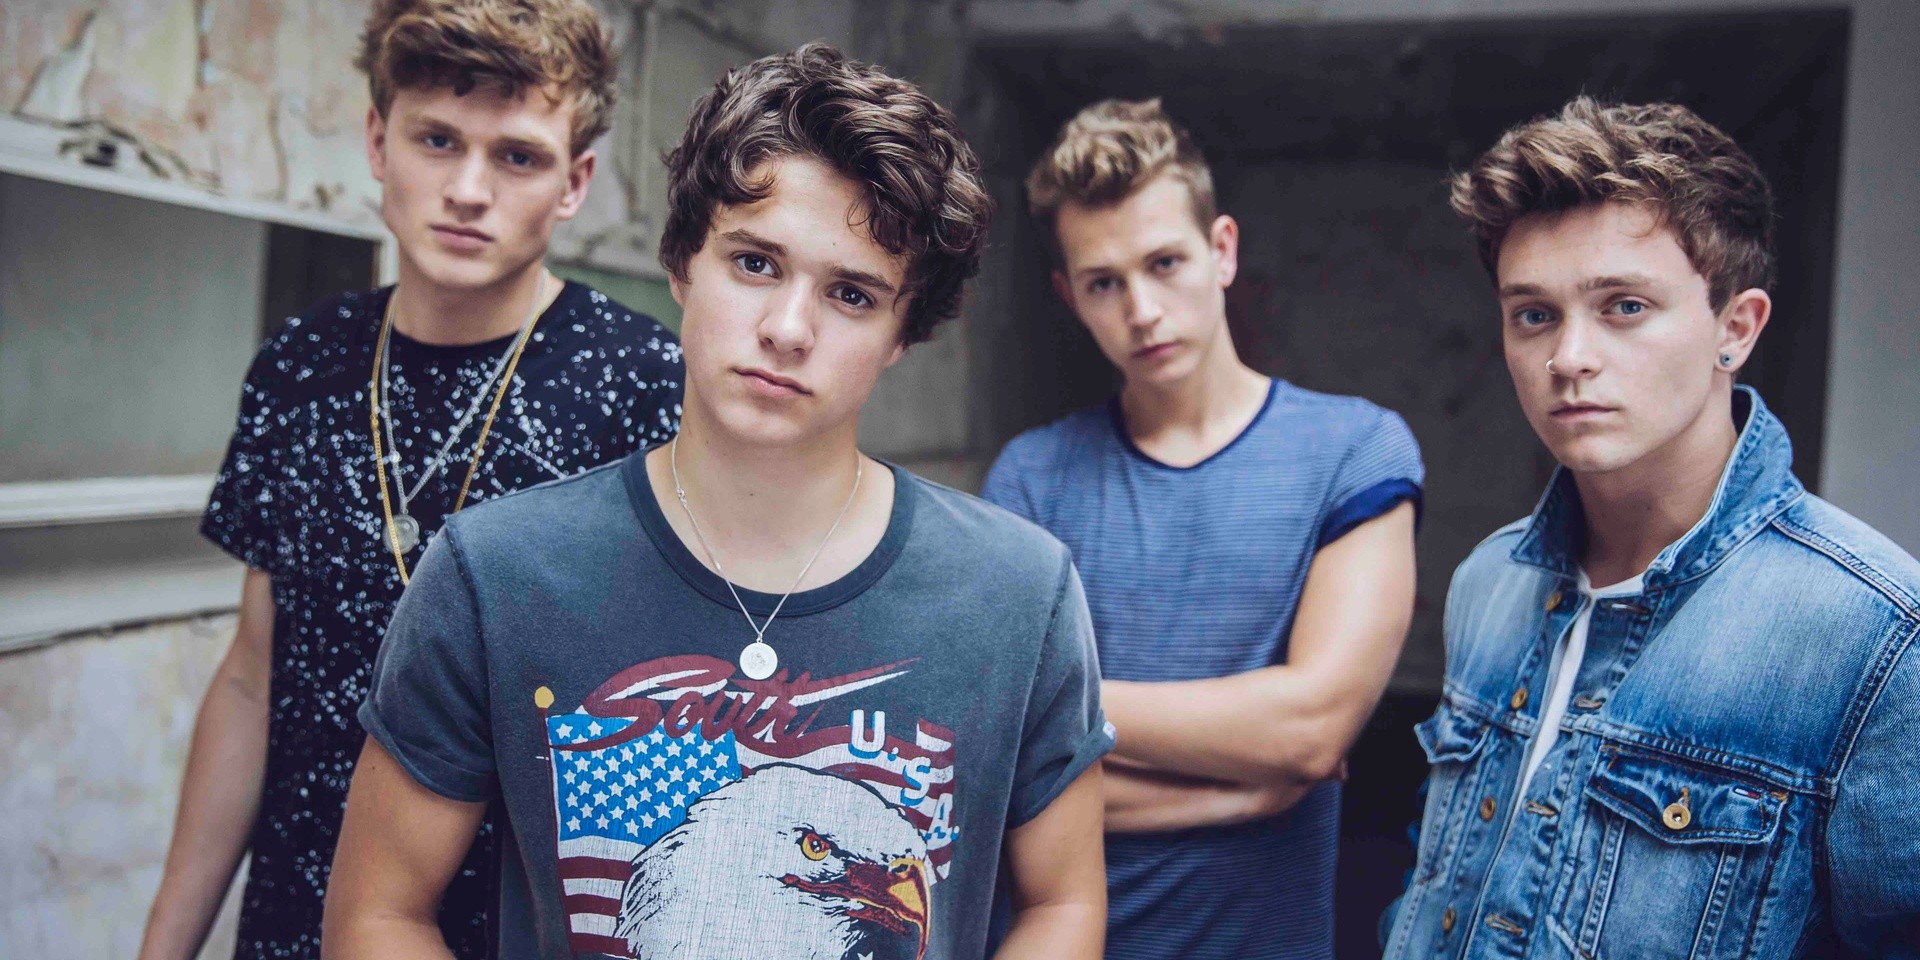 UK's The Vamps set to rock the Coliseum in January